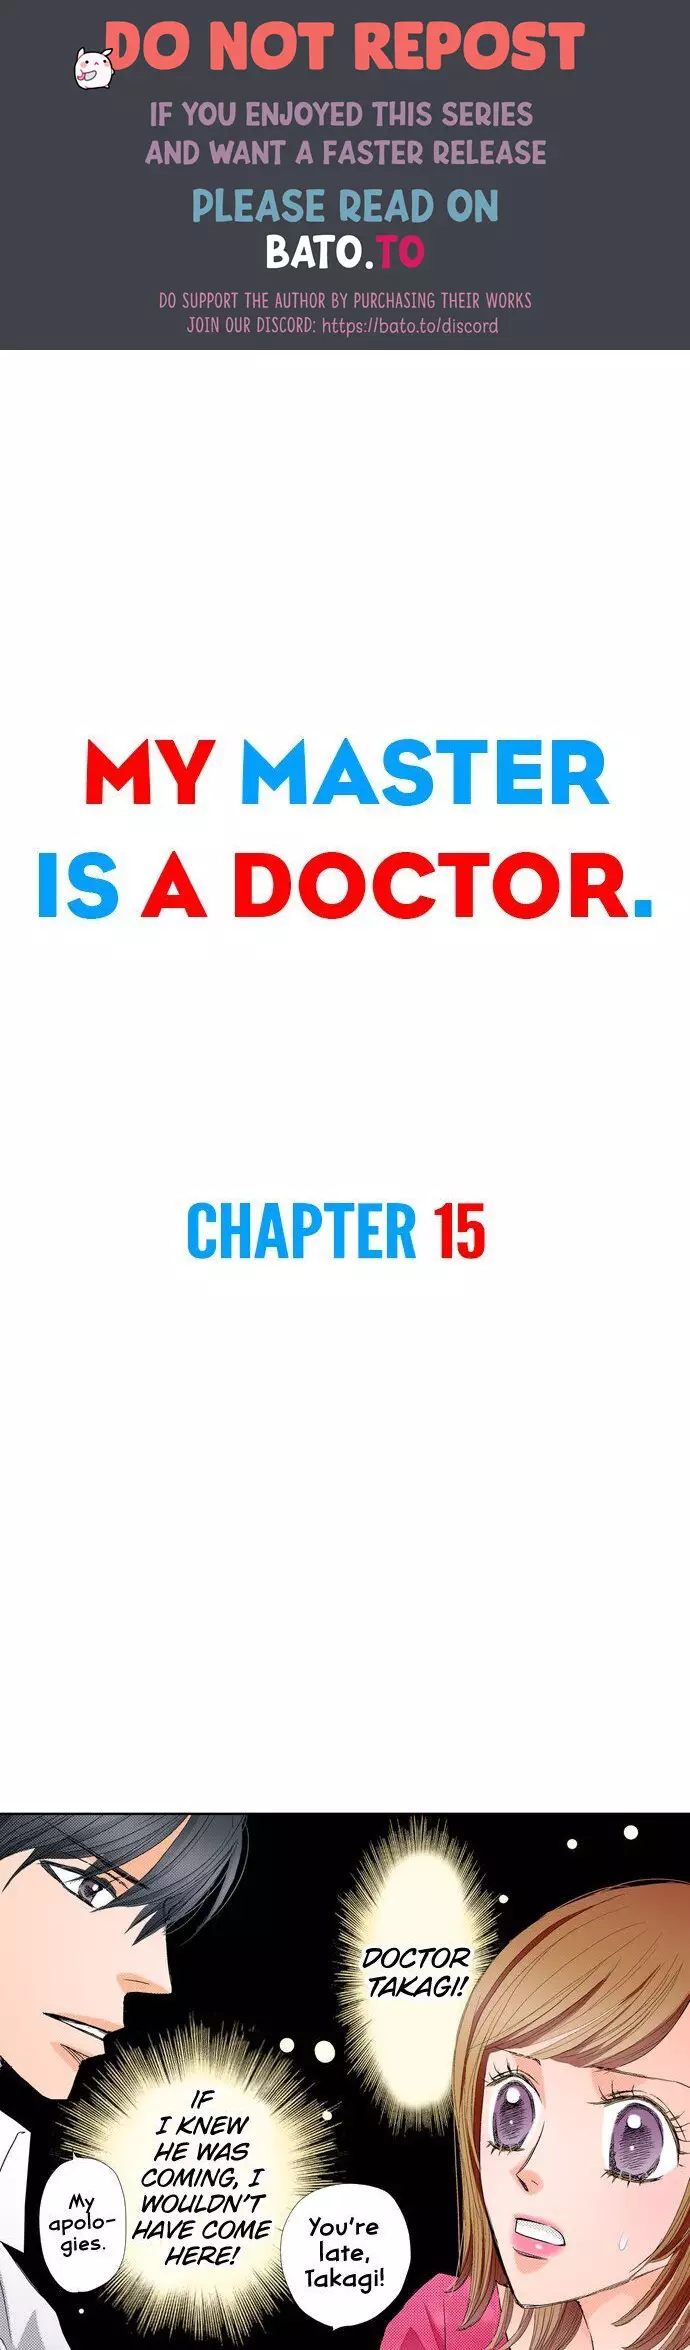 My Master Is A Doctor - 15 page 1-c1a9553d